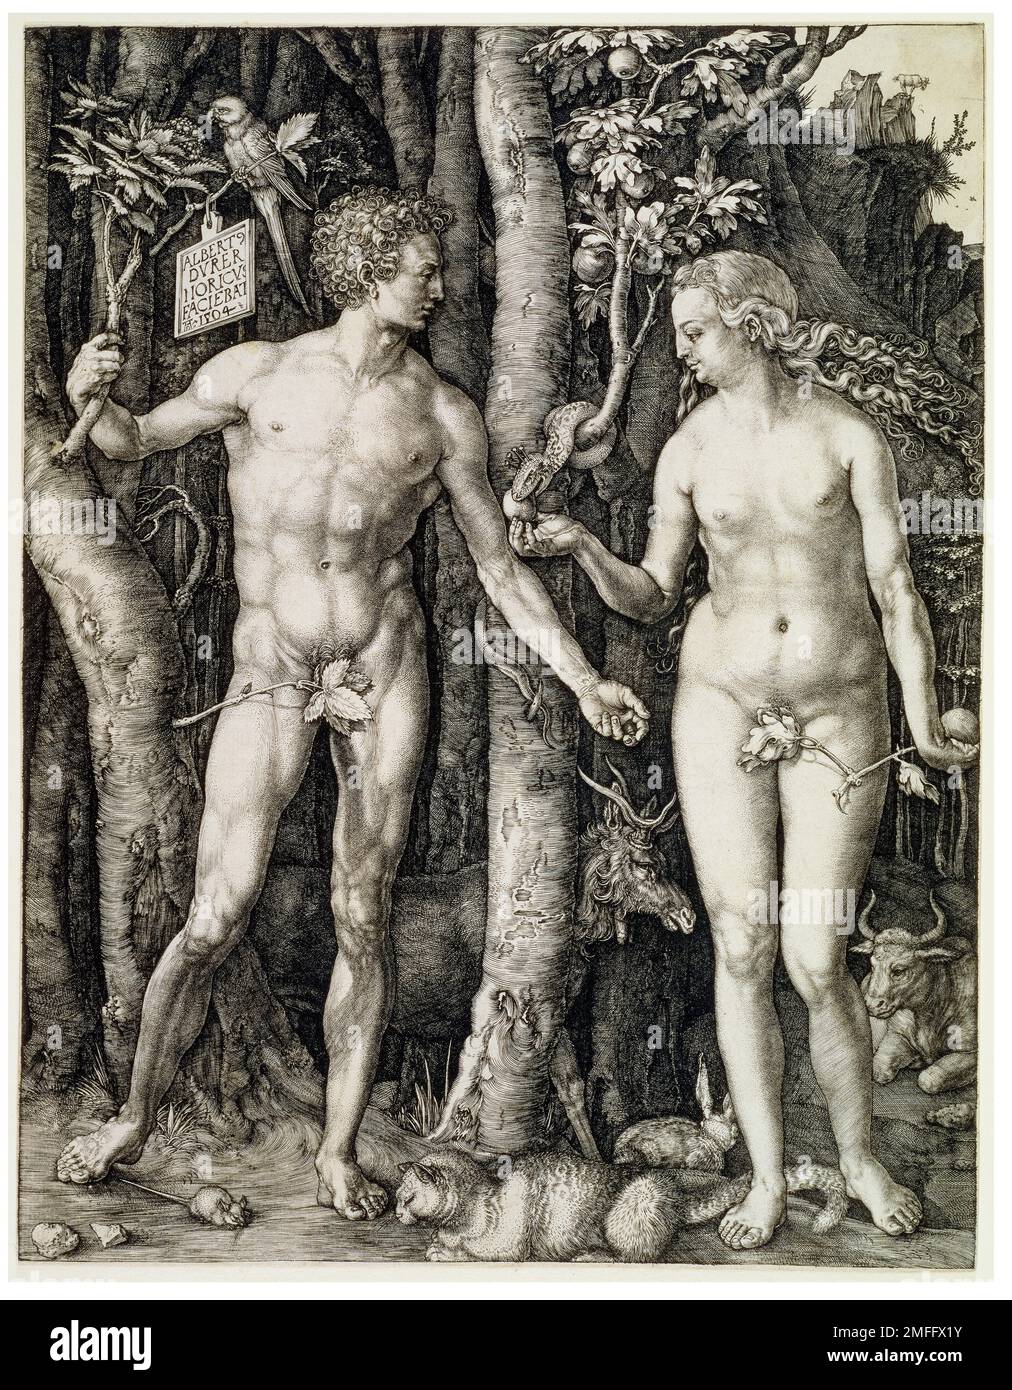 Albrecht Durer, Adam and Eve (The Fall of Man), copperplate engraving, 1504 Stock Photo